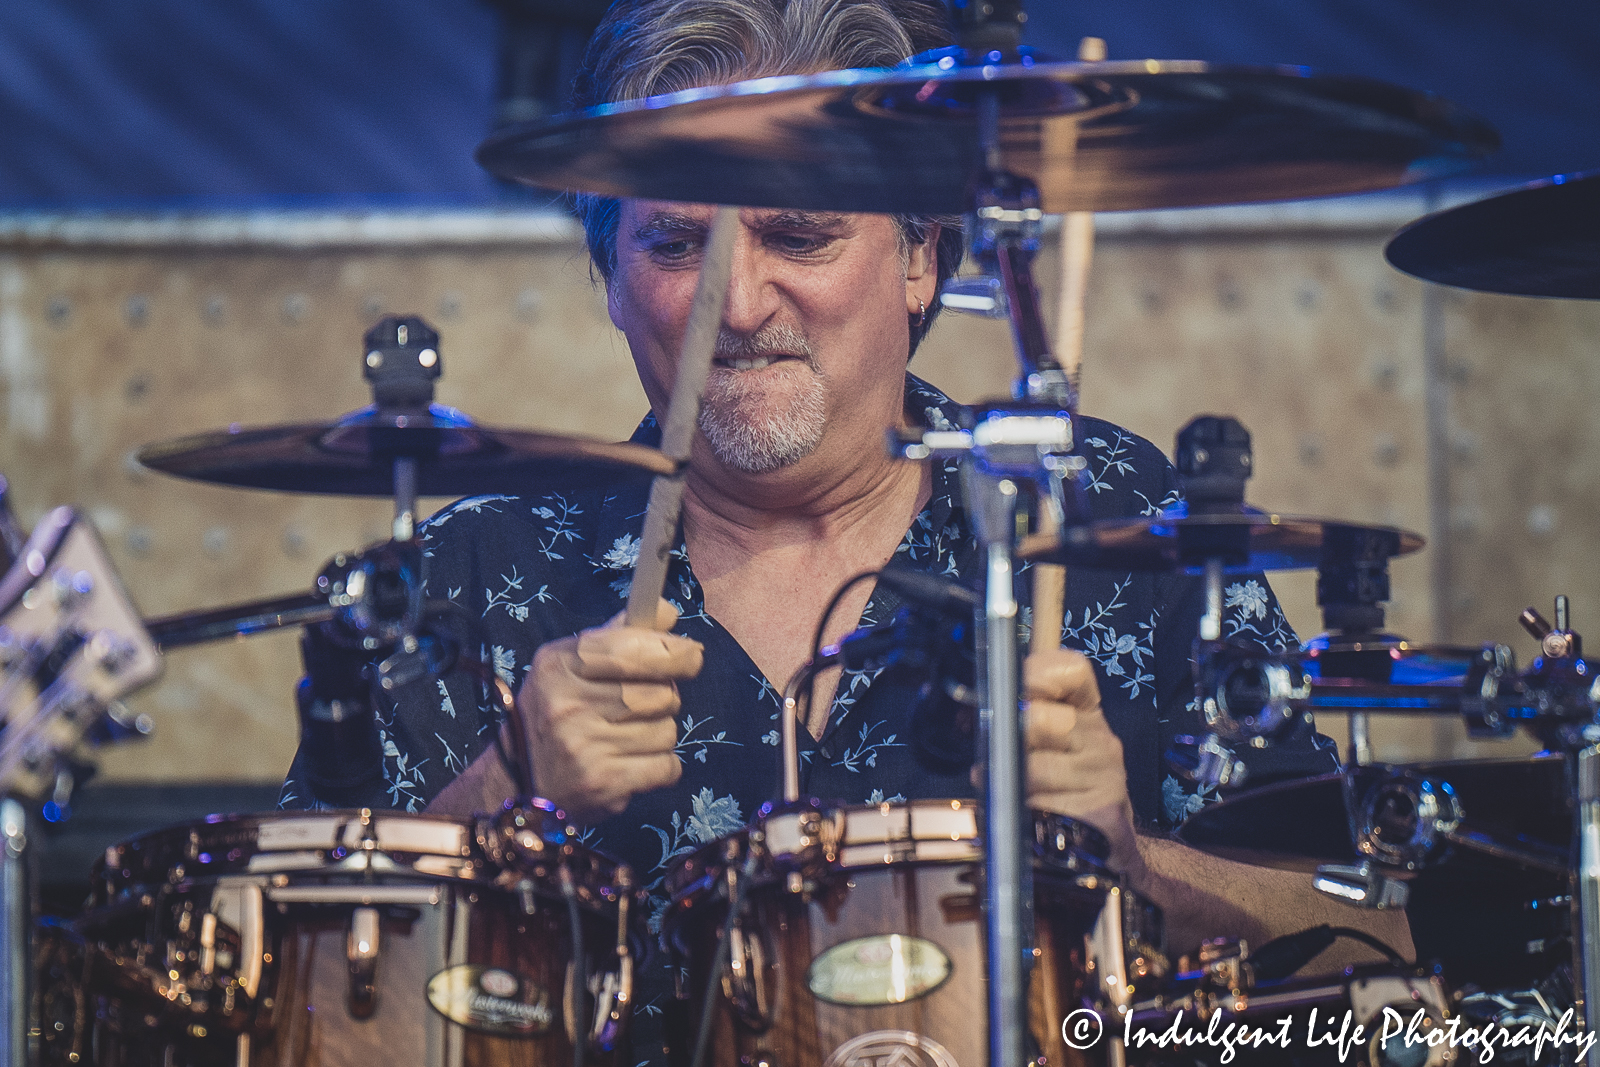 Styx drummer Todd Sucherman playing live in concert at Starlight Theatre in Kansas City, MO on June 14, 2022.